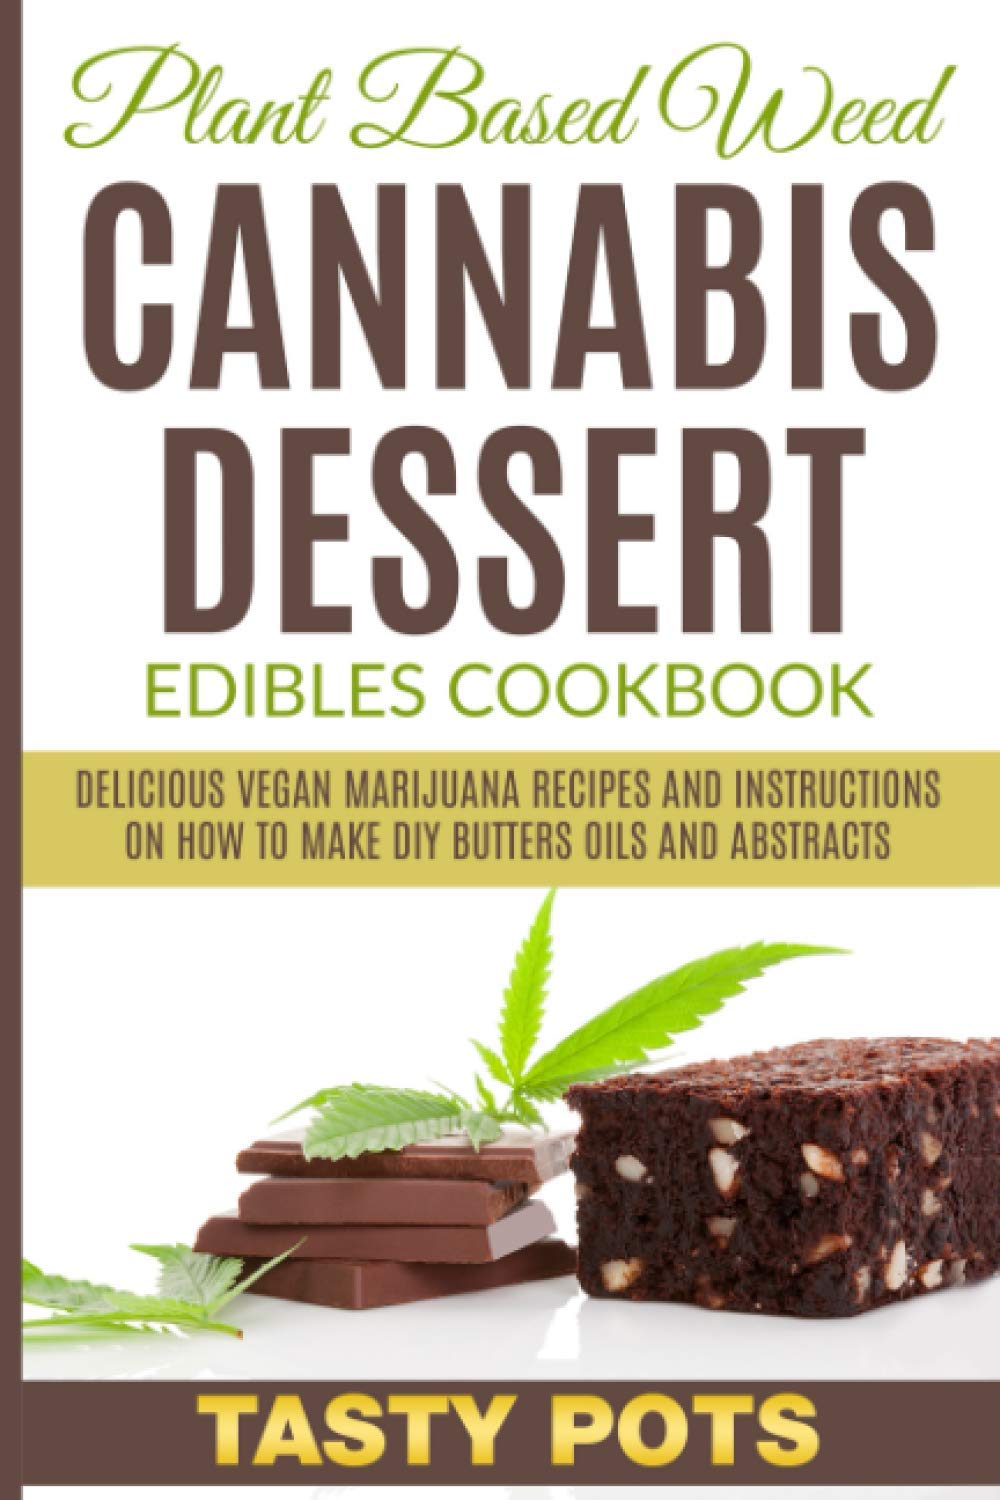 ADDING CANNABIS INTO YOUR DAILY MEALS 75091 1 - ADDING CANNABIS INTO YOUR DAILY MEALS